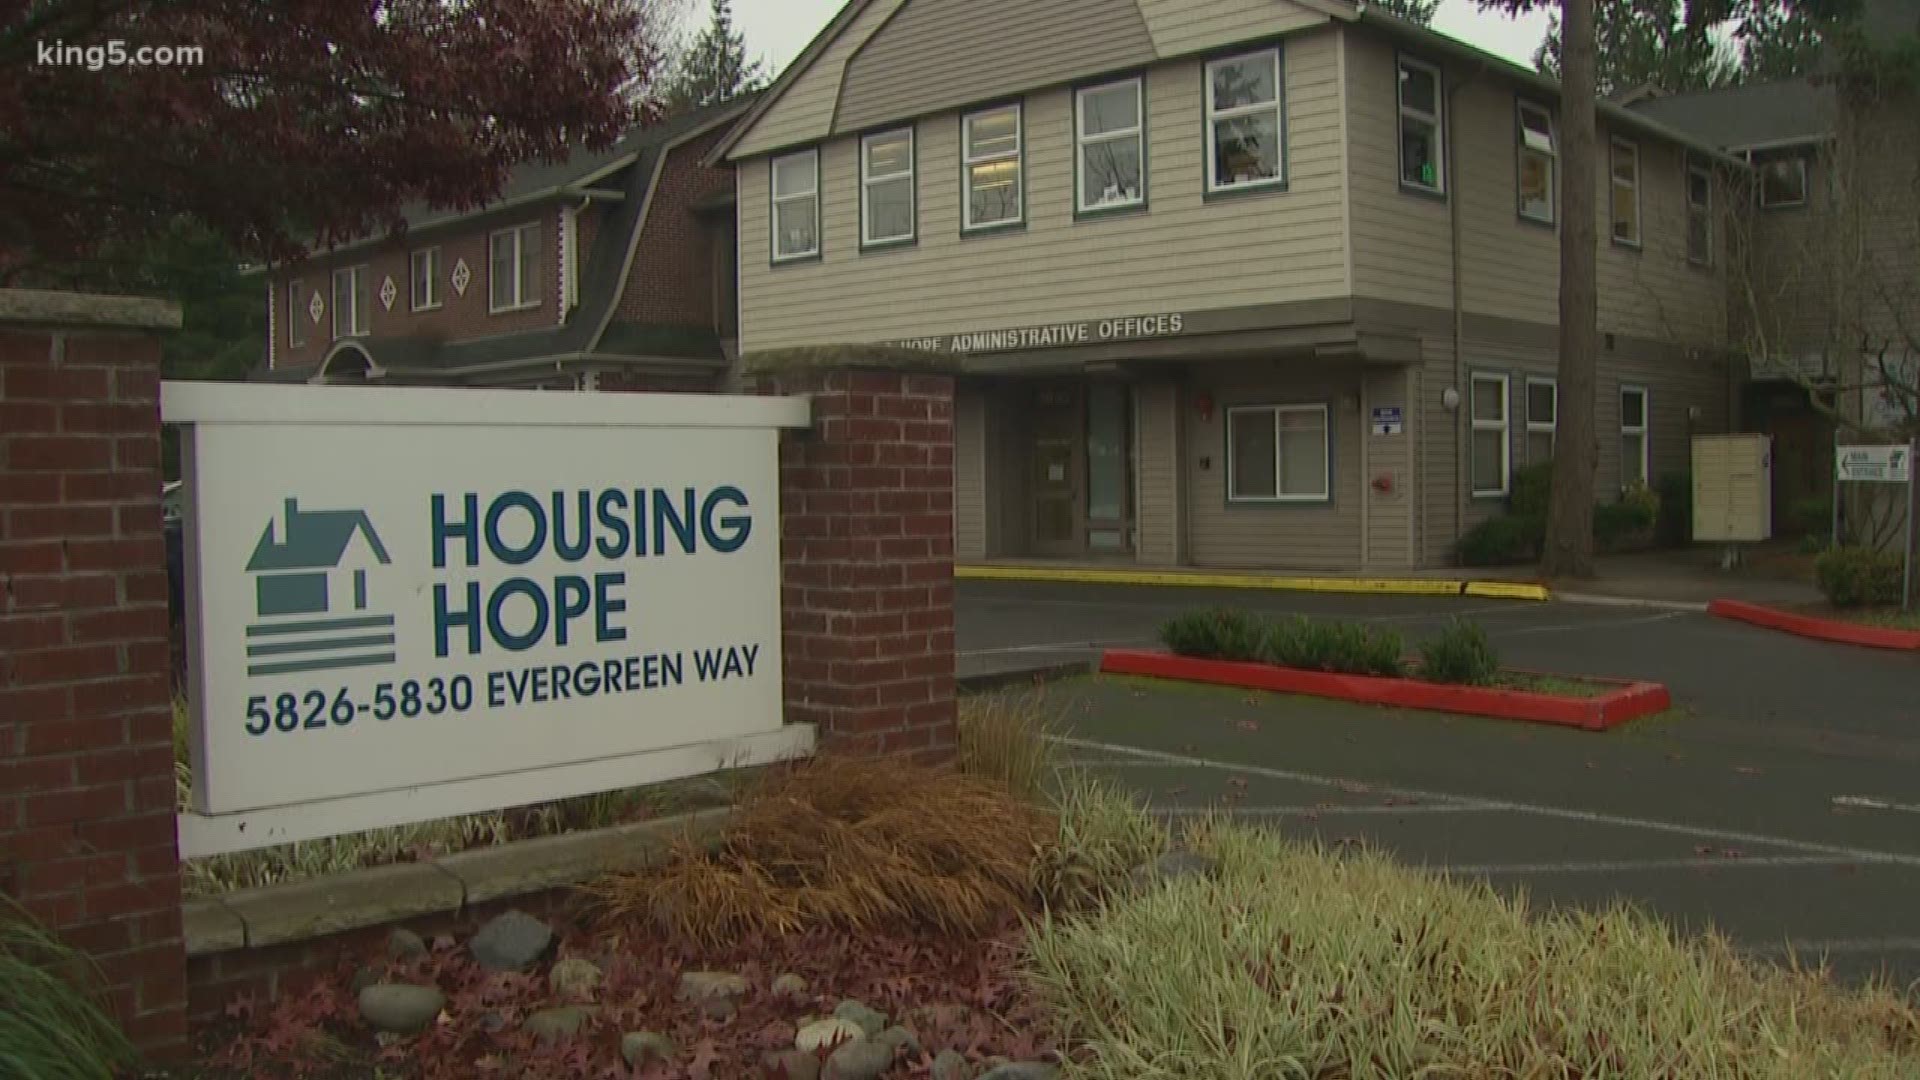 A decision by the Everett City Council could decide the fate of a proposed project to house homeless students.